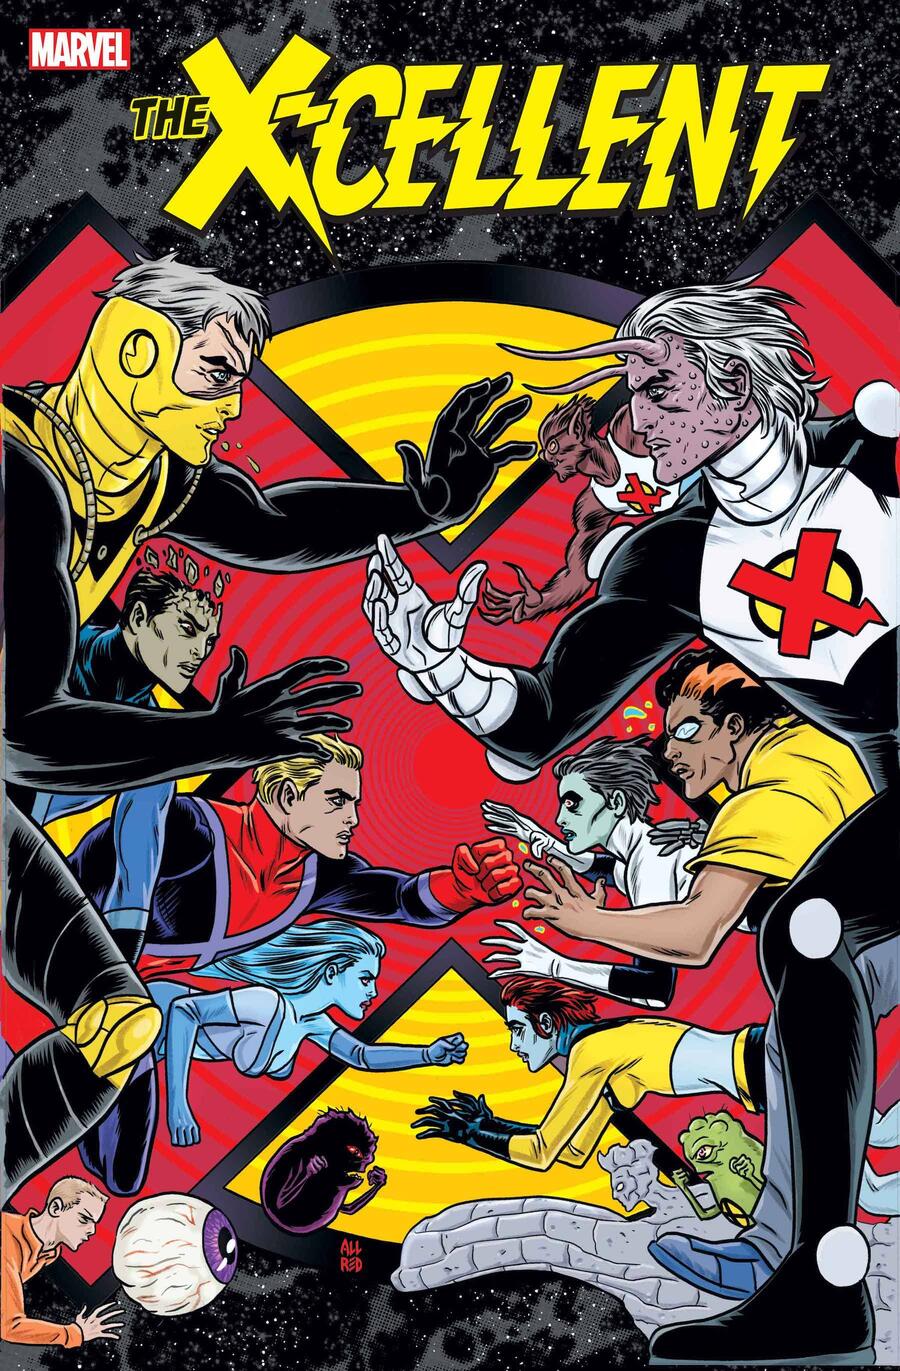 X-CELLENT #1 cover by Michael Allred and Laura Allred